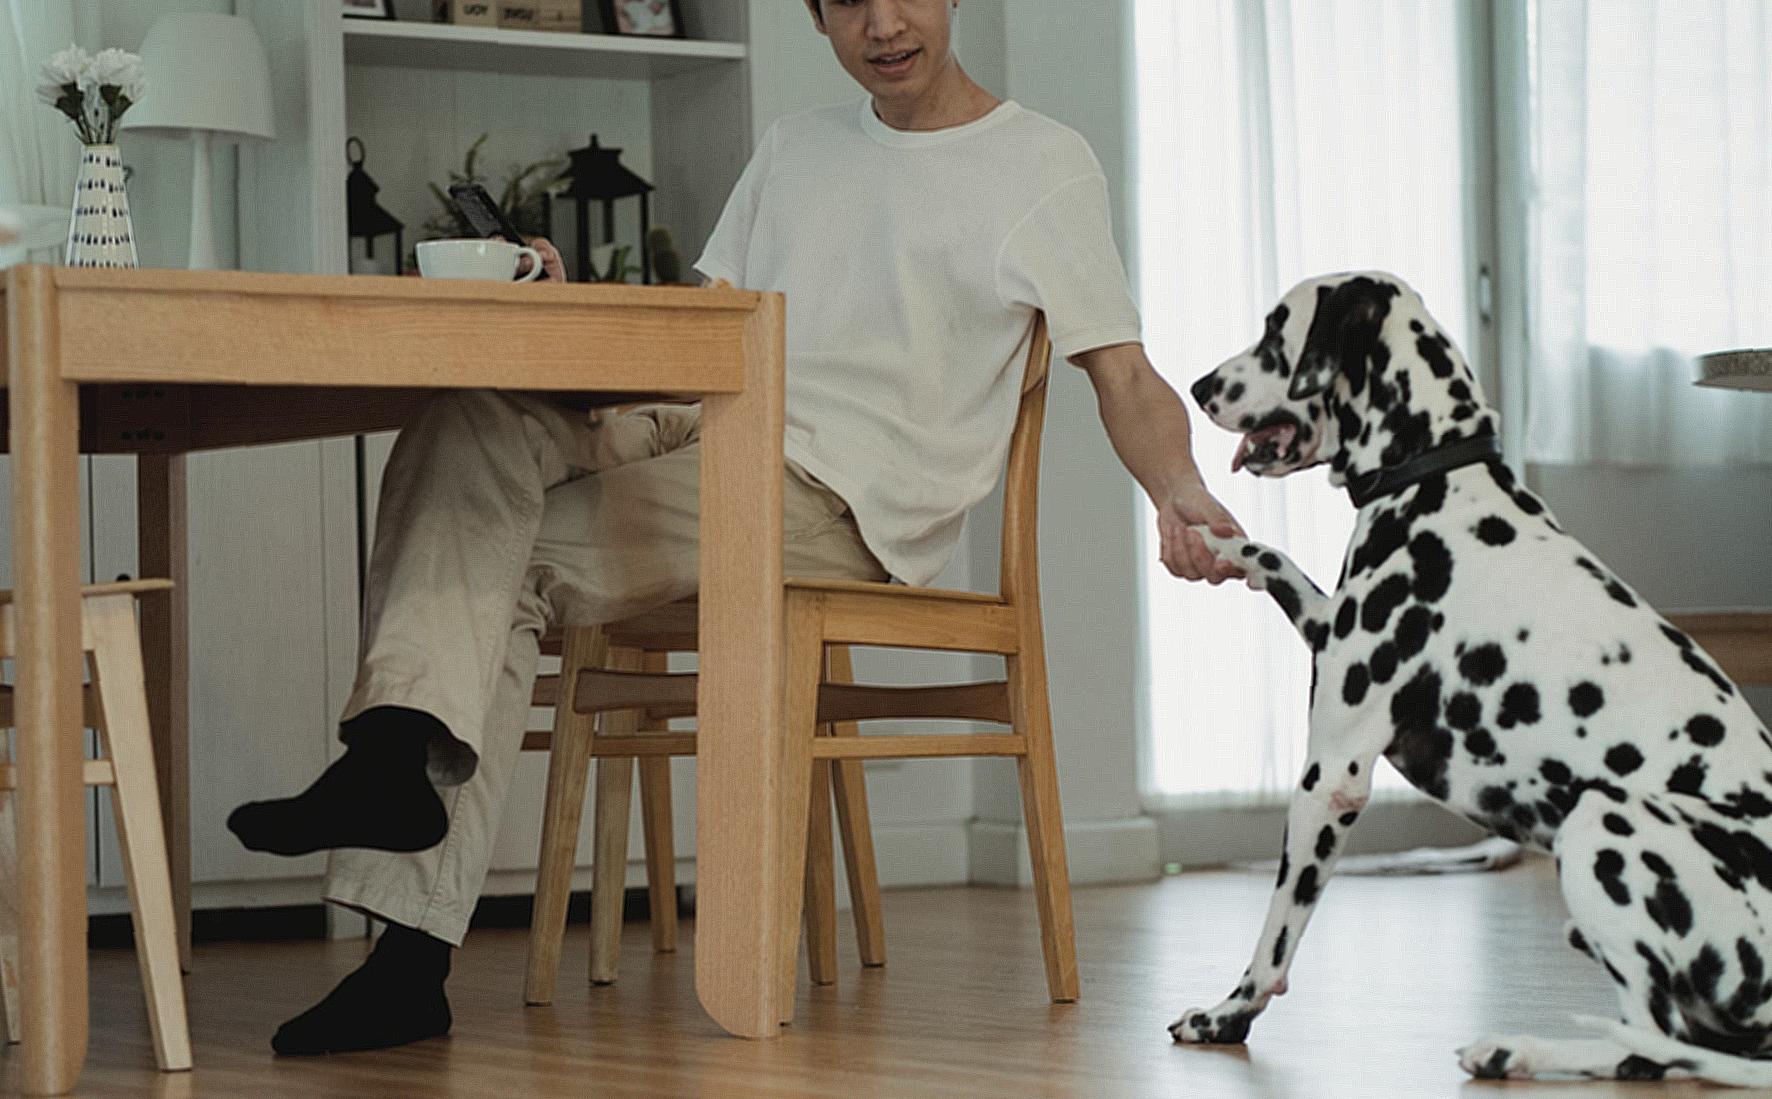 Man and Dog in Room